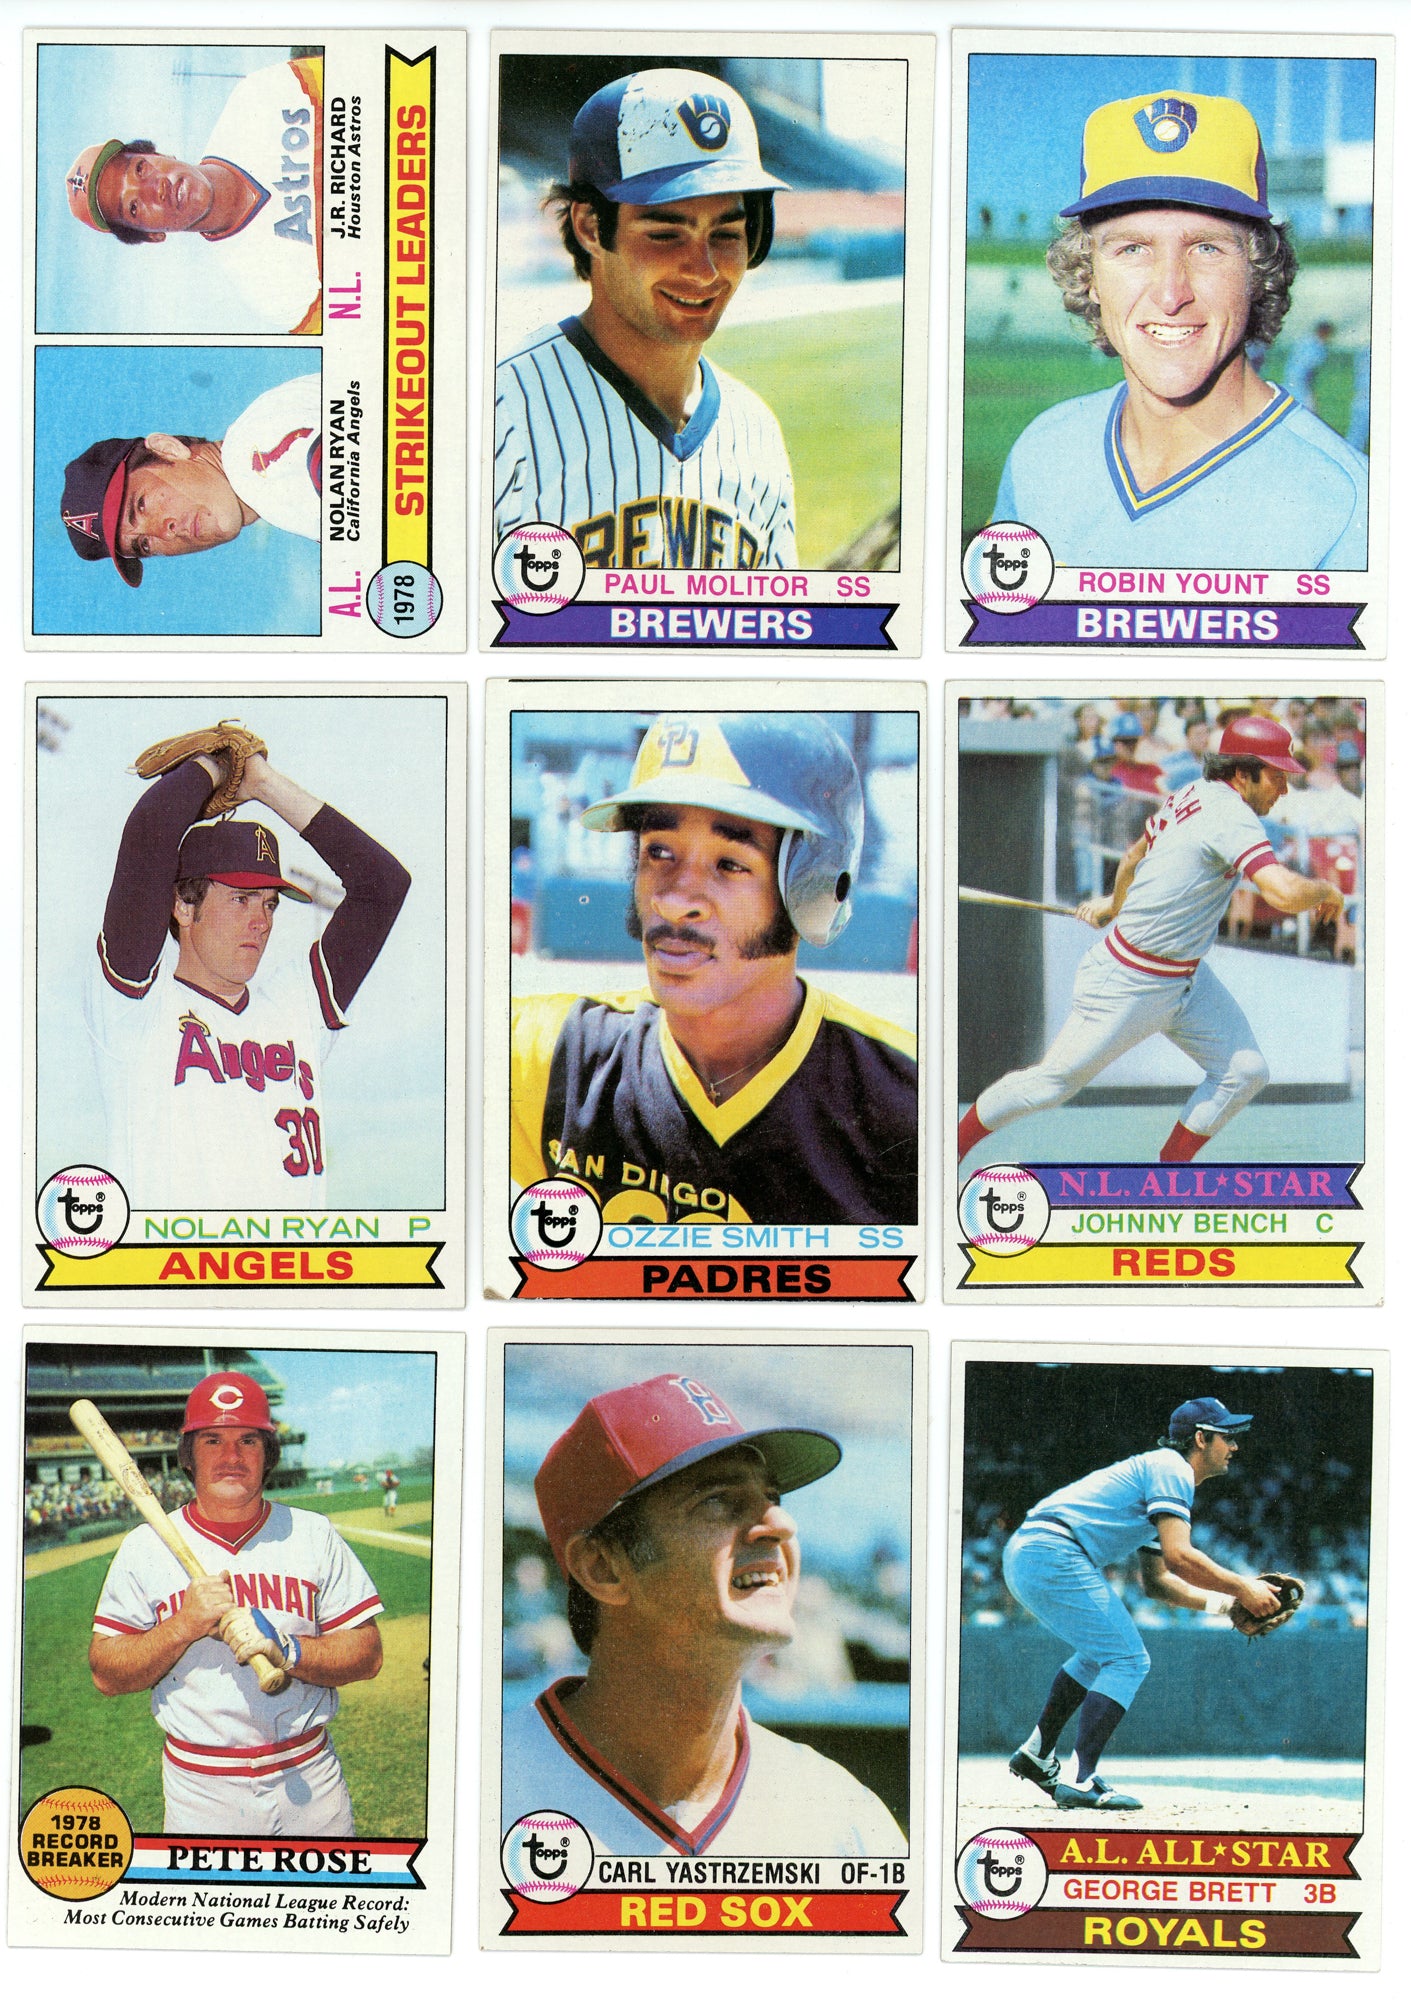 1979 TOPPS BASEBALL COMPLETE SET BREAK - 25 CARDS PER BOX! INCLUDES 2 OR MORE HOFers!